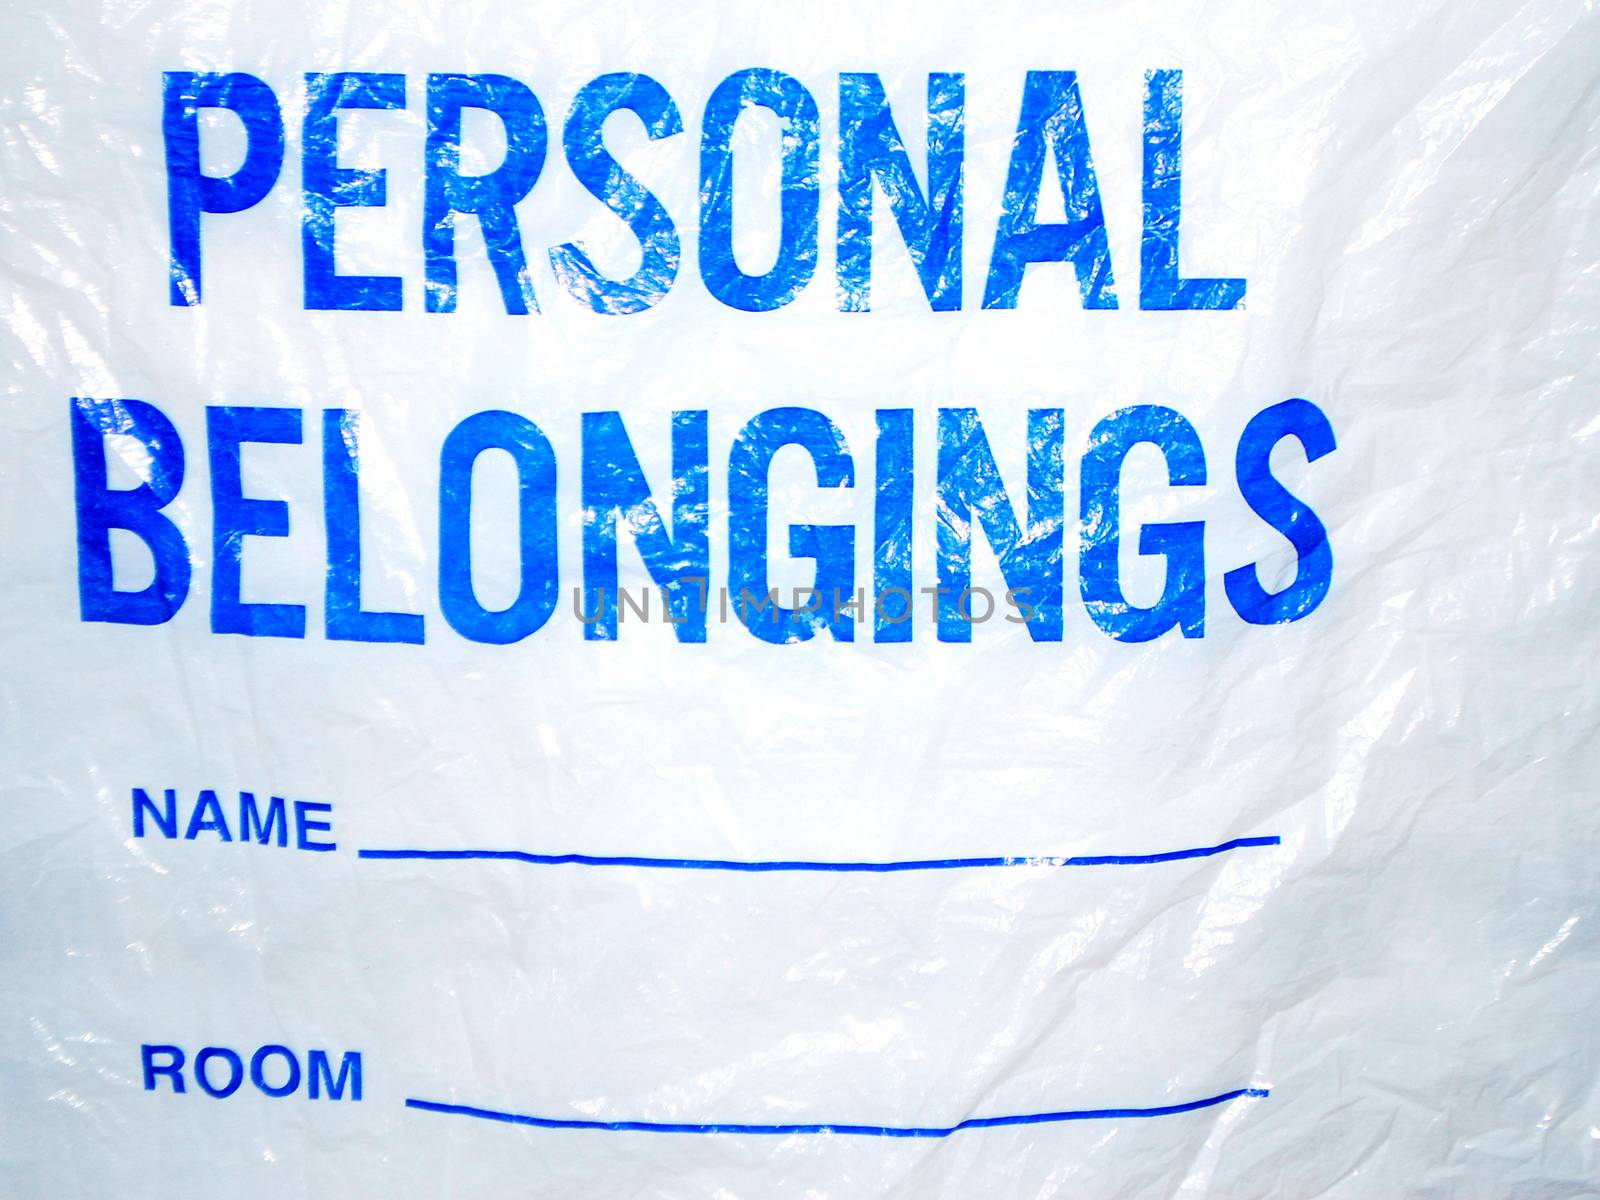 Personal belongings plastic bag  for patients entering the hospital.